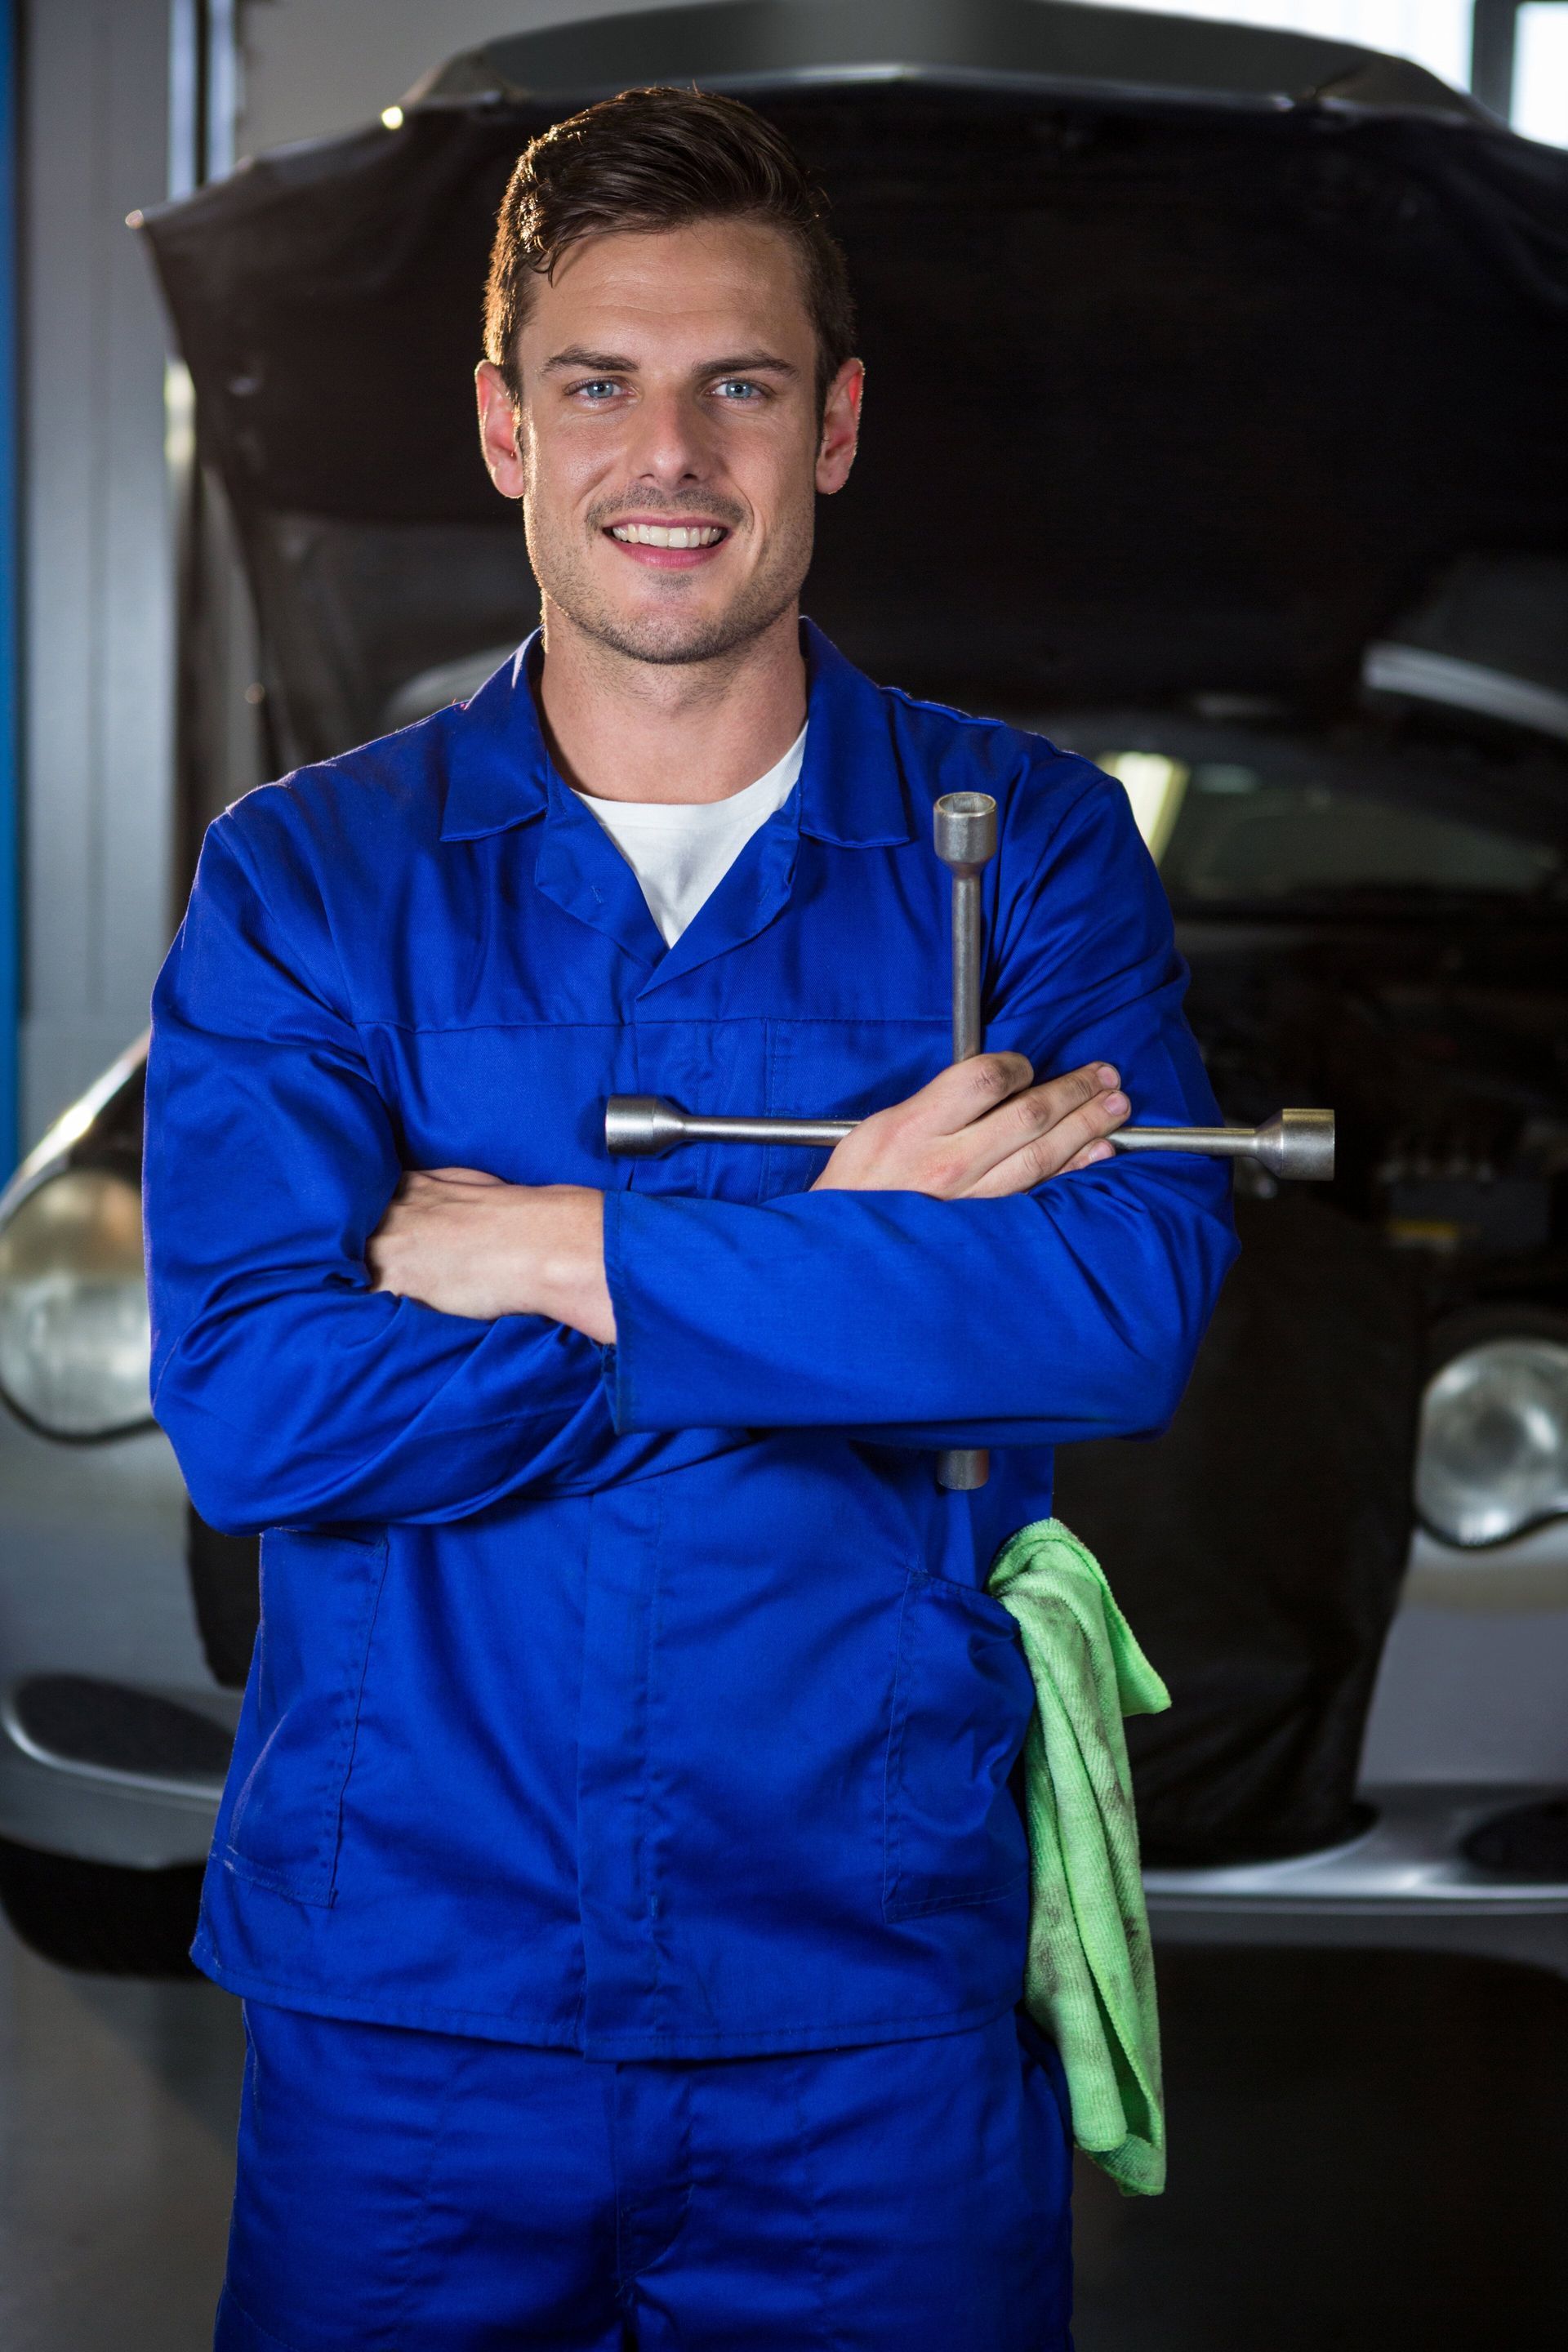 A mechanic is holding a wrench in front of a car in a garage.